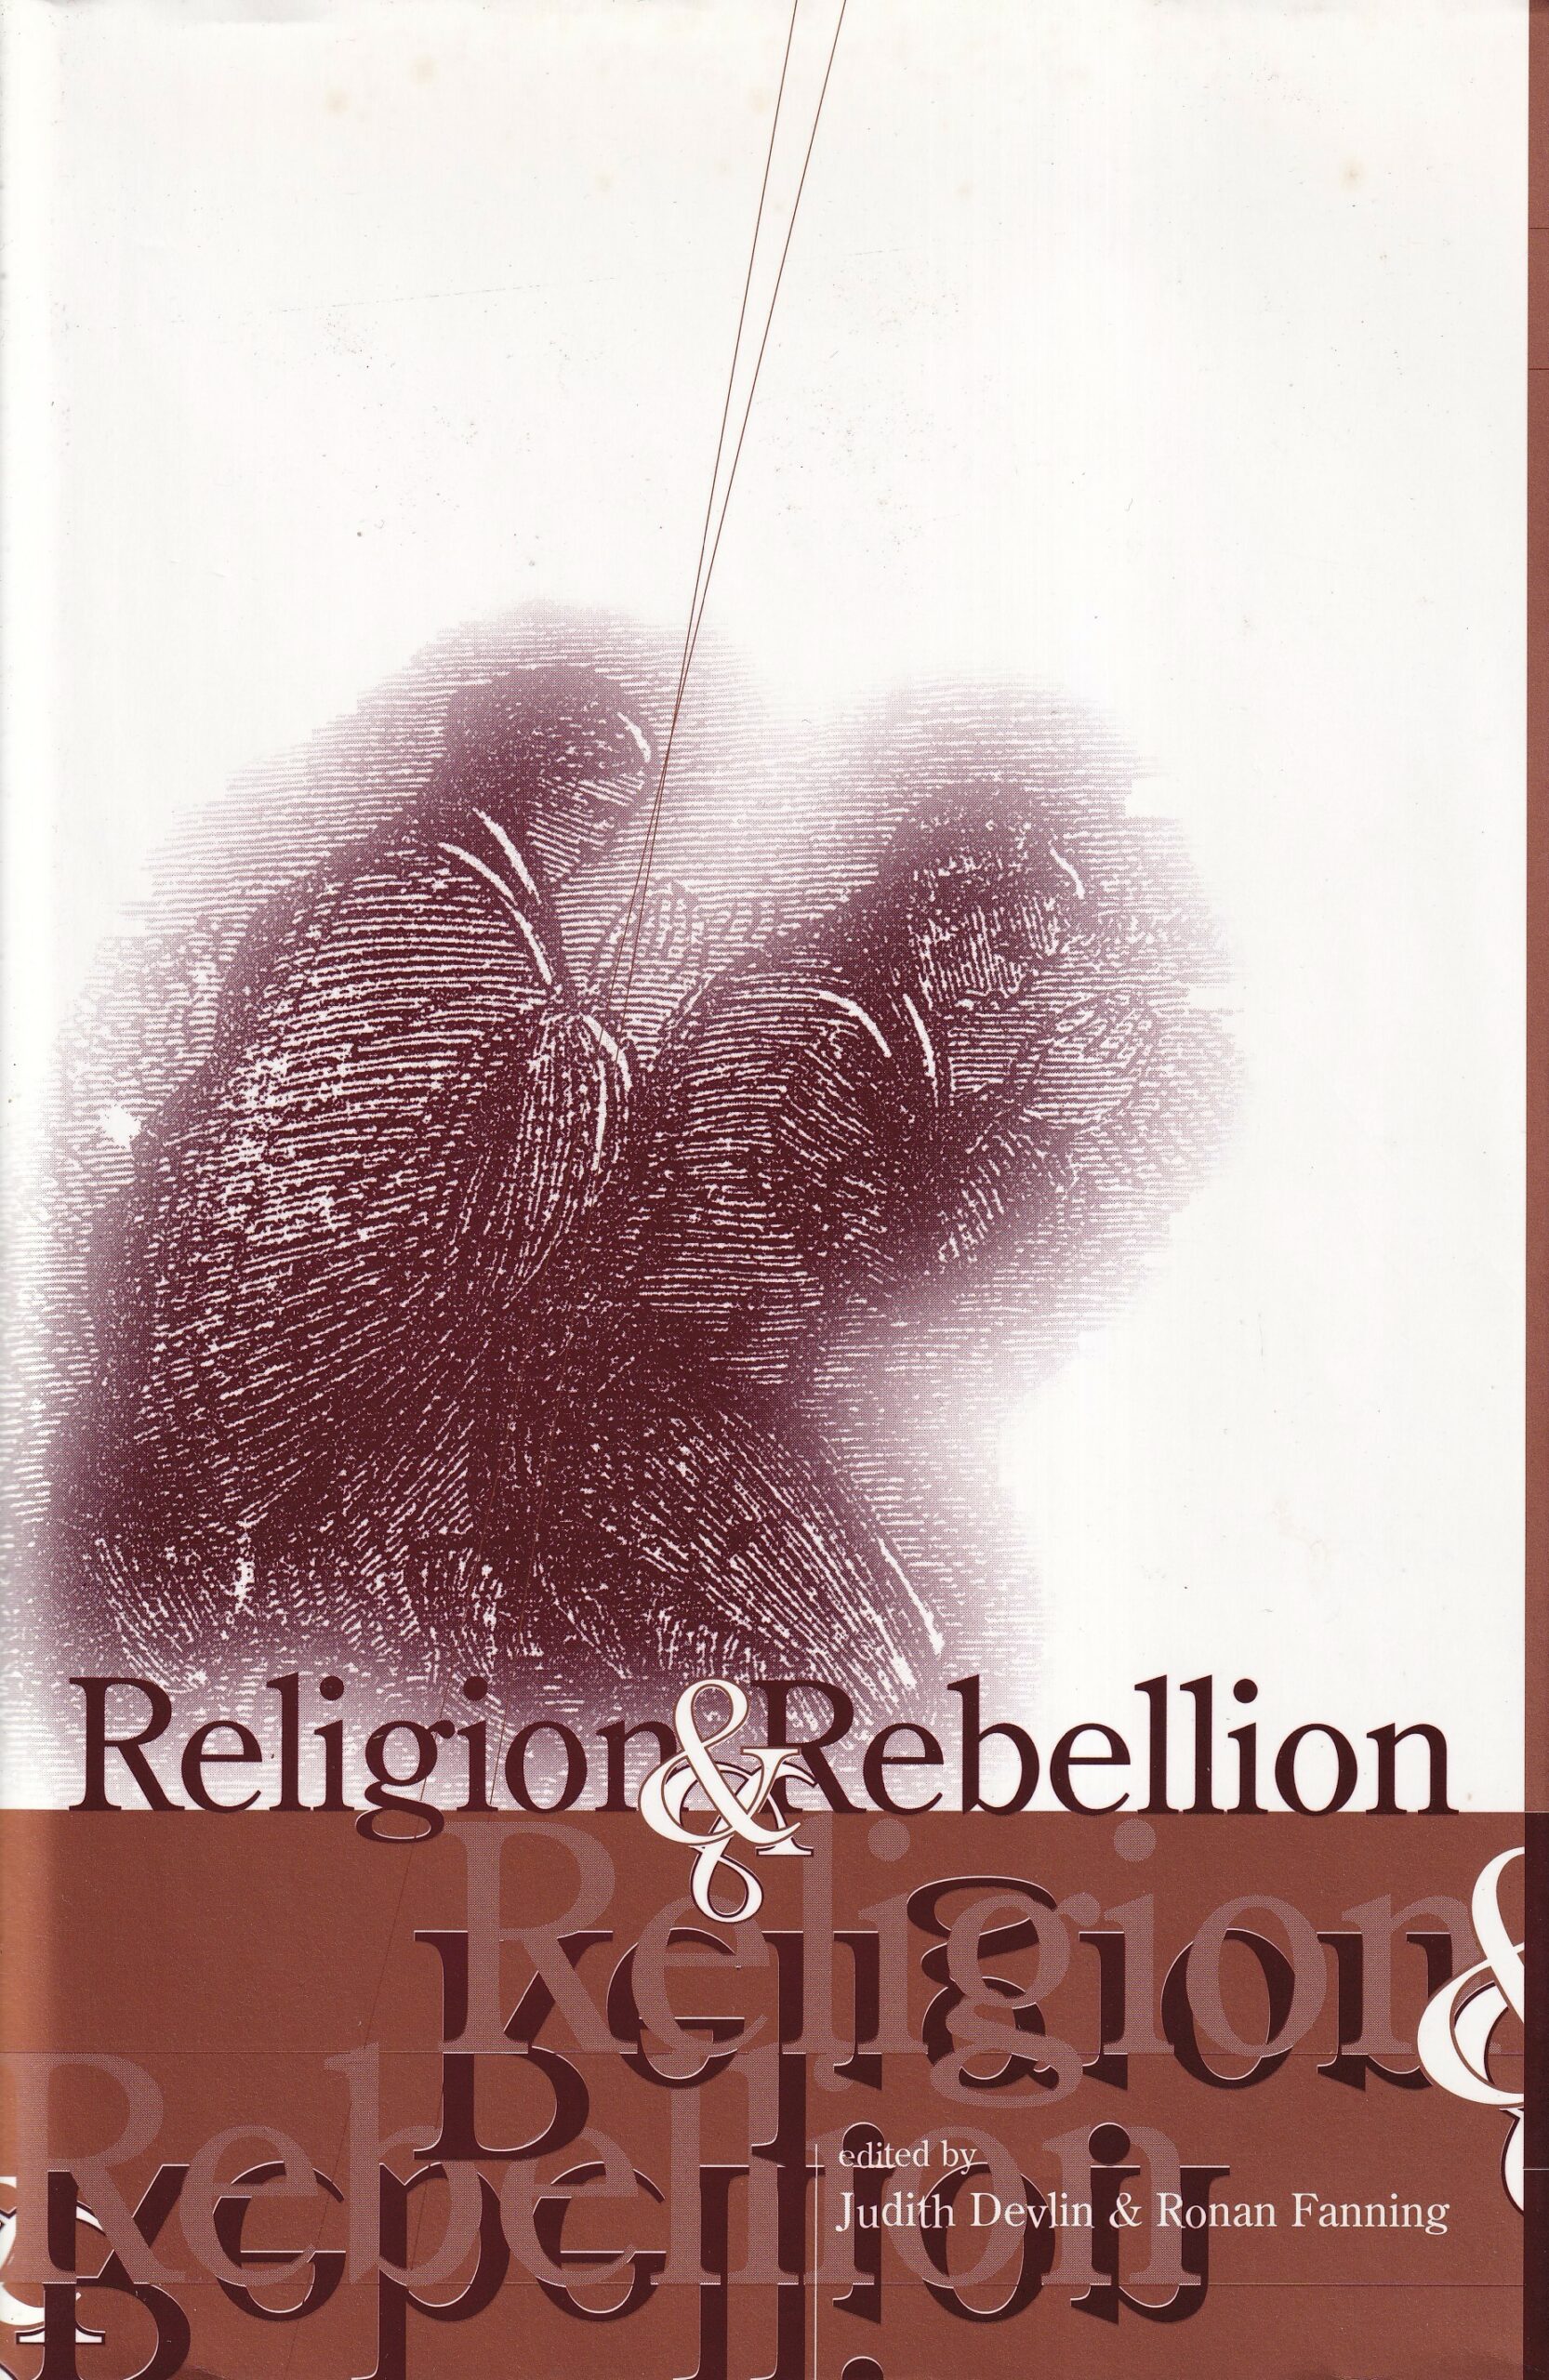 Religion and Rebellion | Judith Devlin and Ronan Fanning (eds.) | Charlie Byrne's